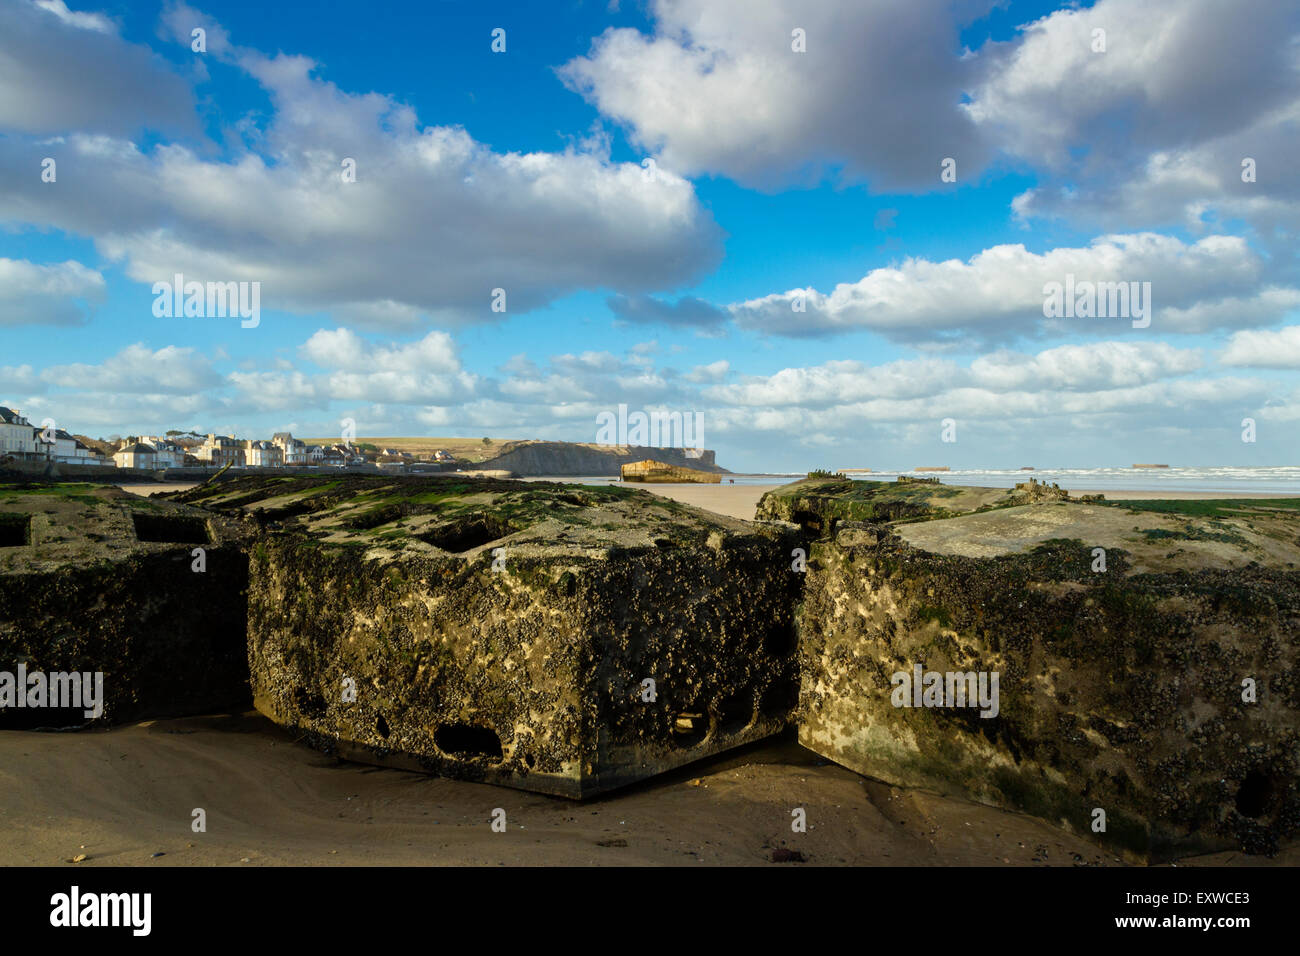 Arromanches Les Bains, Ruins Of Mulberry B Or Port Winston, Basse Normandie, Calvados, France Stock Photo